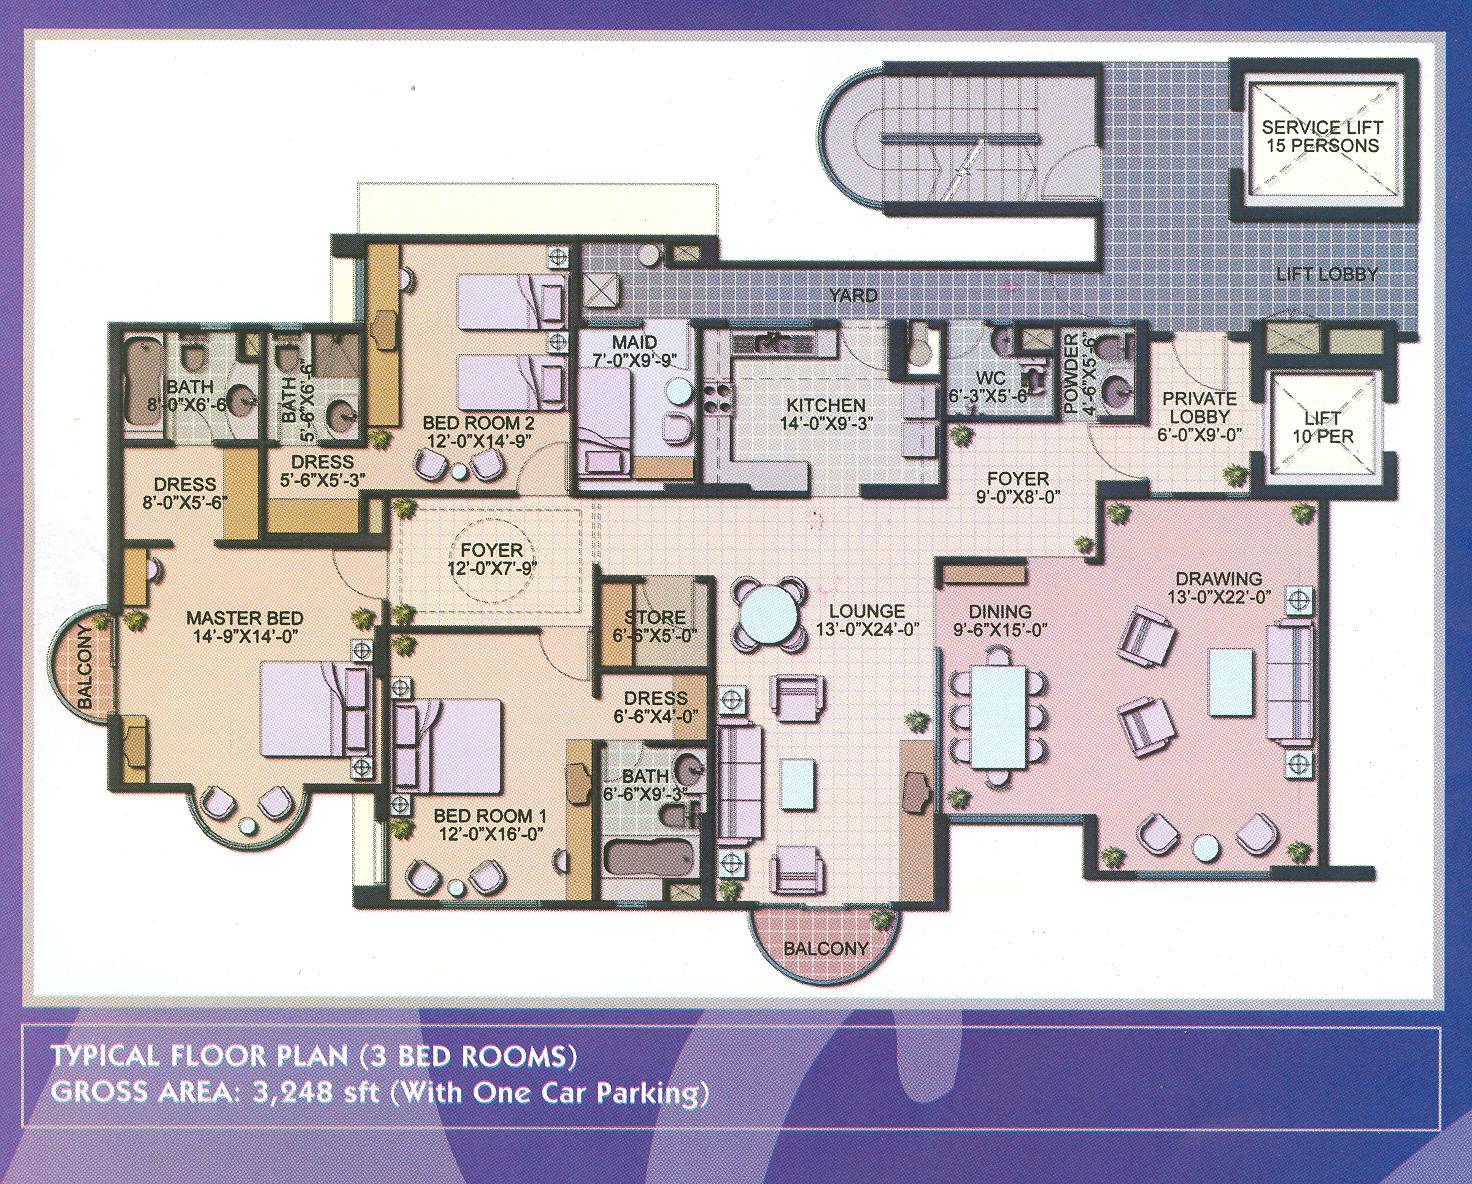 Image Floor Plans  For Apartments 3  Bedroom  And Luxury  